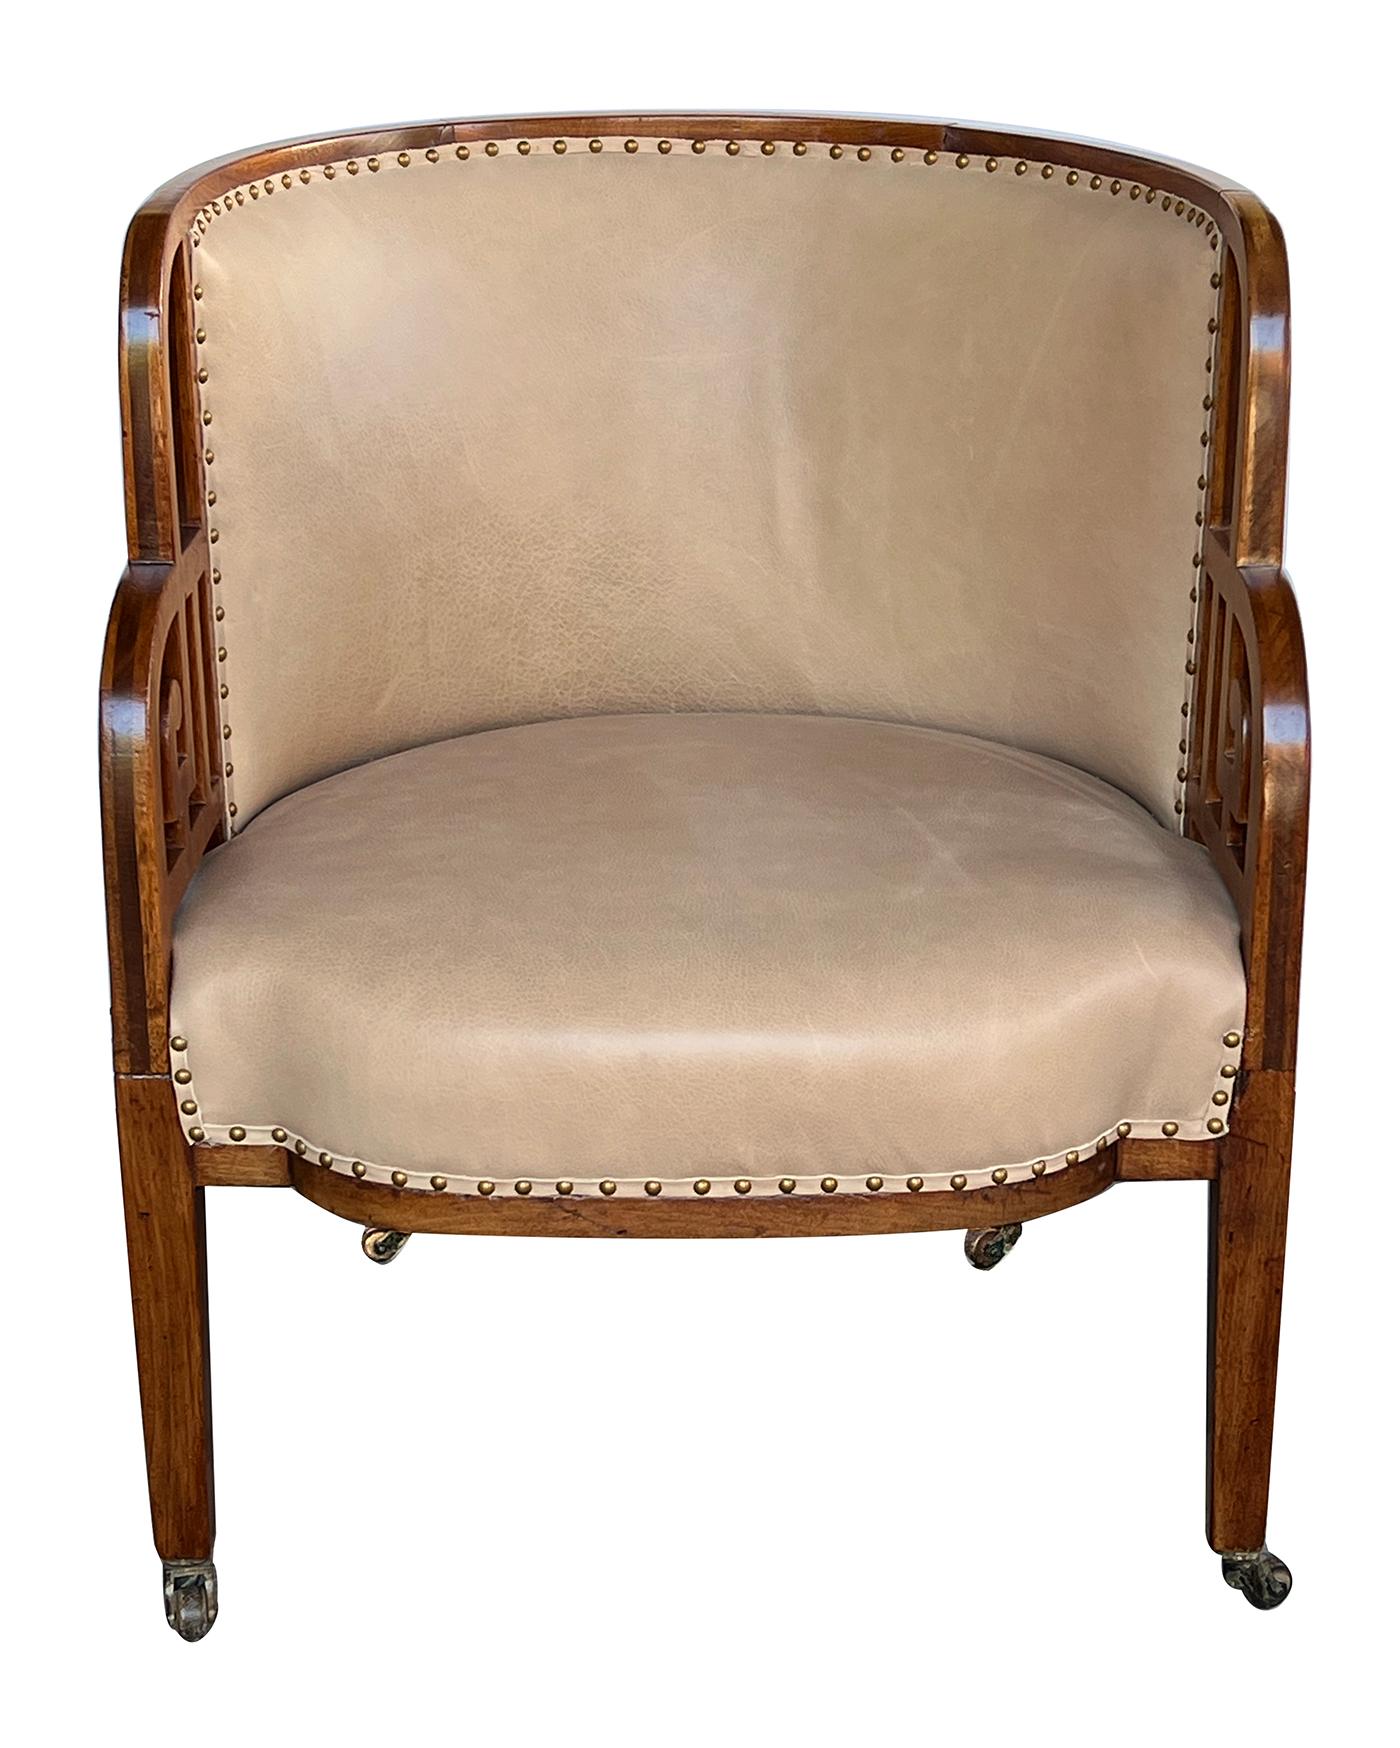 the framed in-curved back above a bowed upholstered seat flanked by openwork sides; all raised on tapering legs ending in casters.